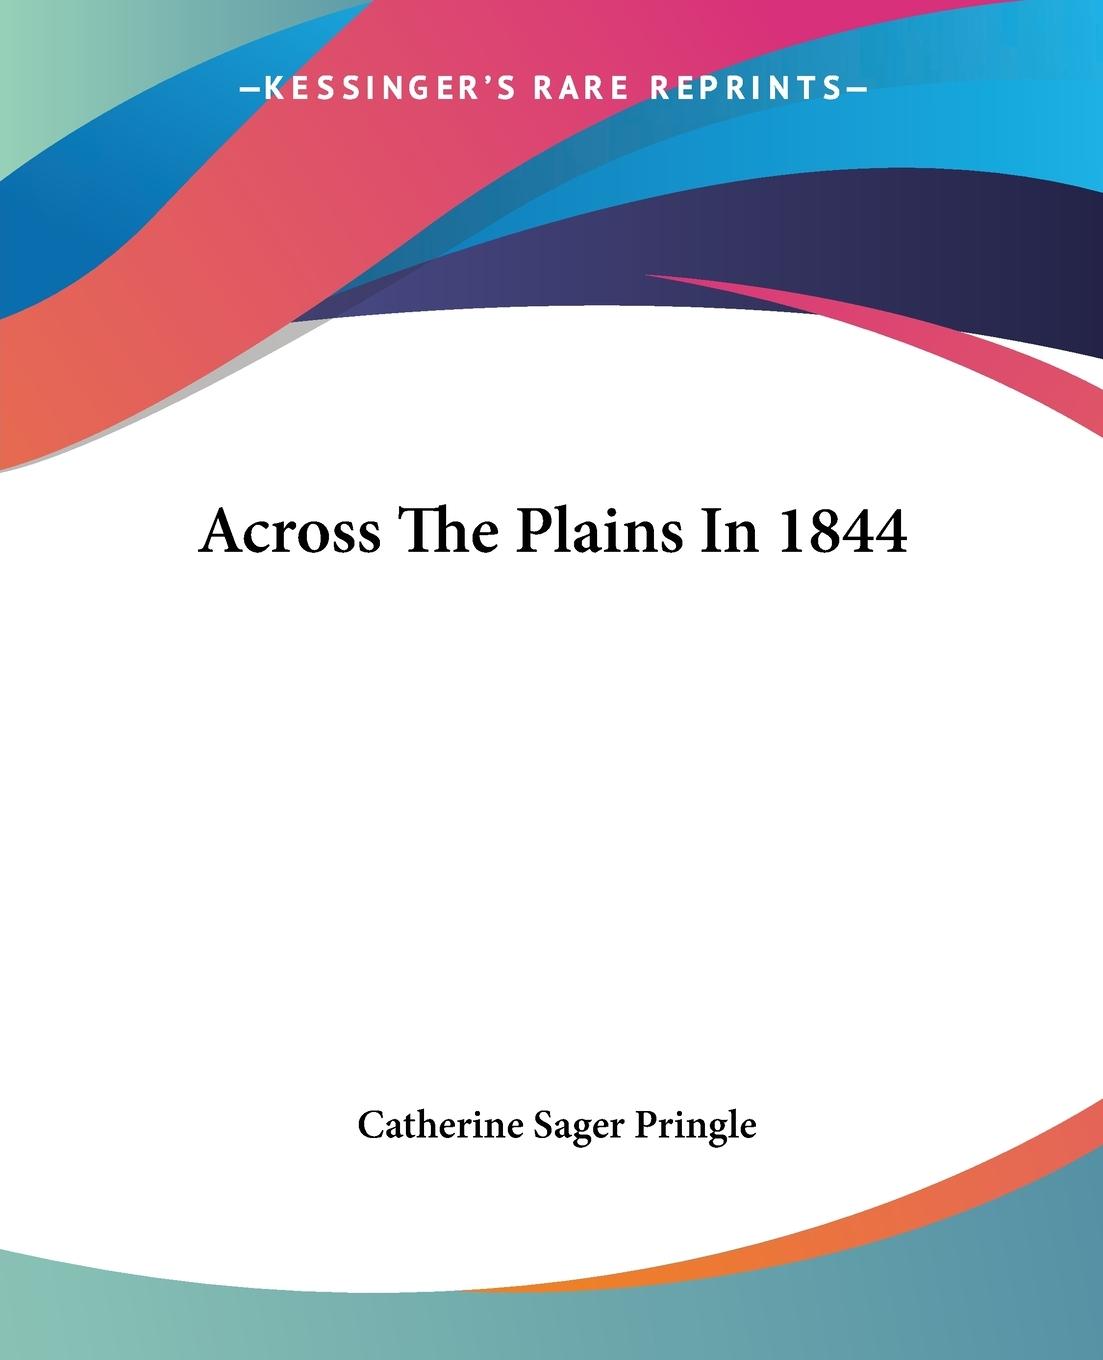 Across The Plains In 1844 - Pringle, Catherine Sager